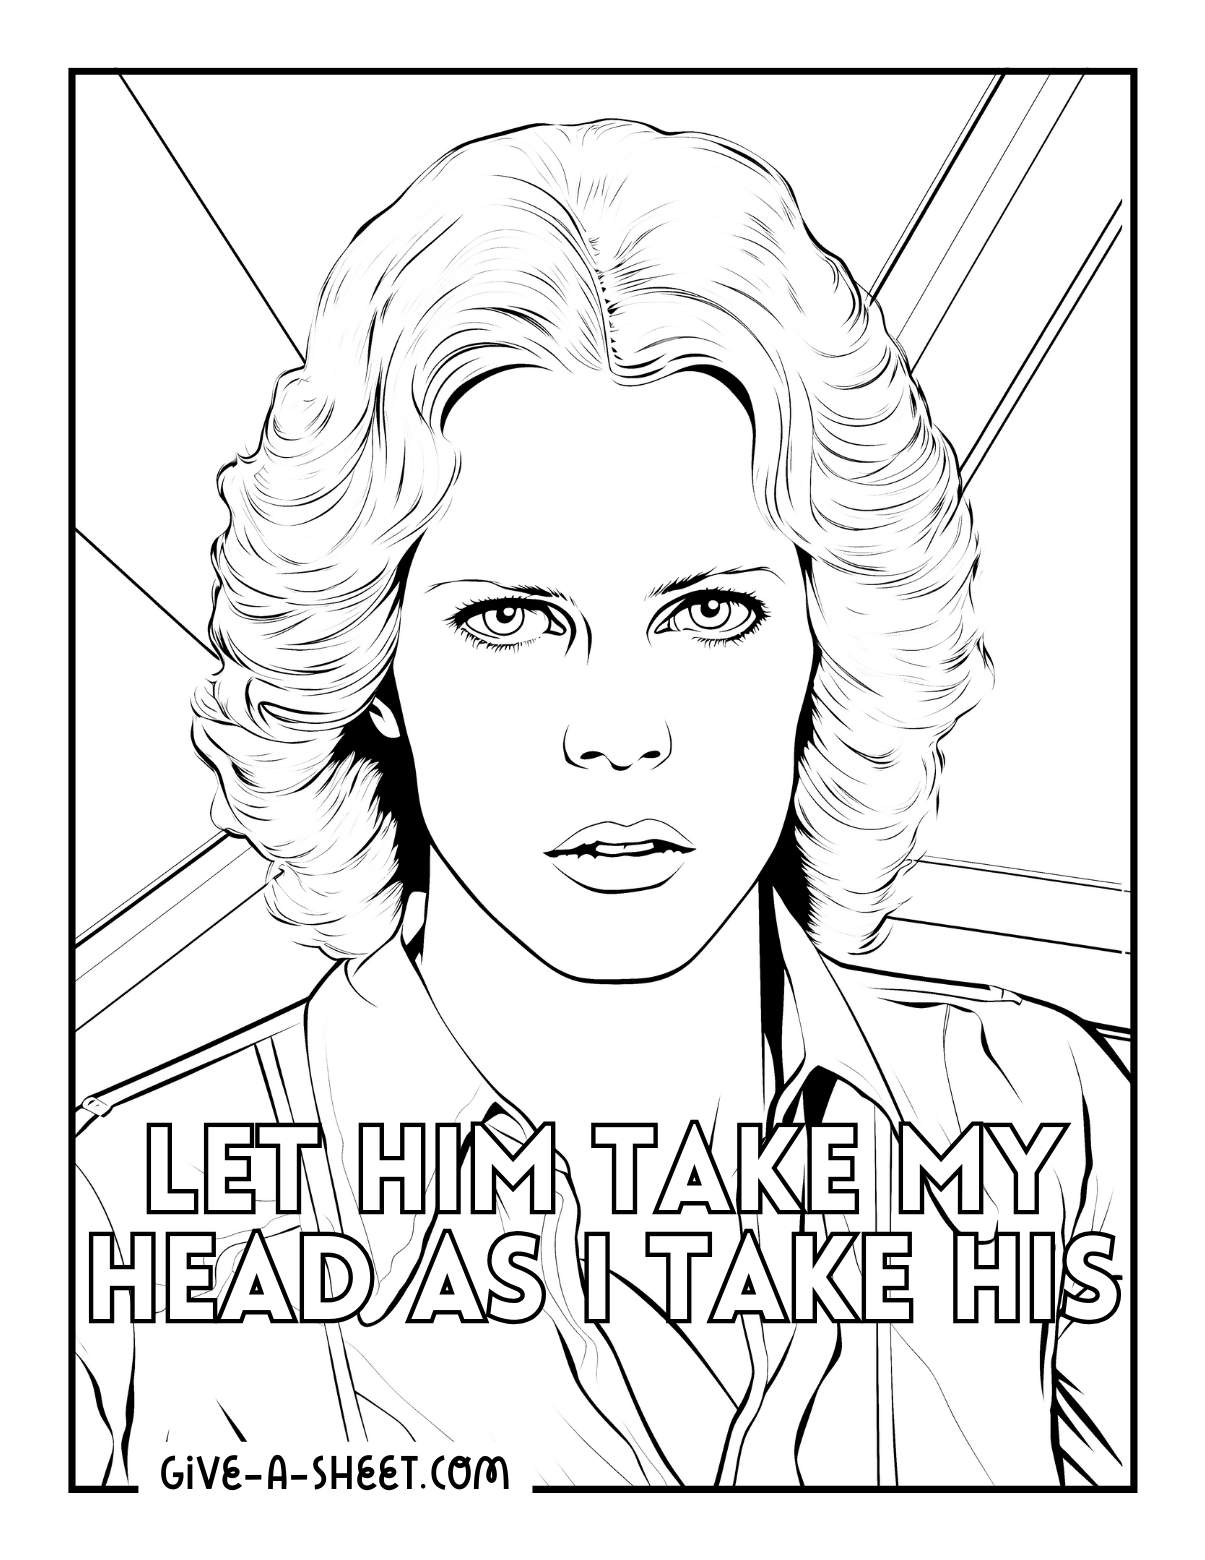 Jamie Lee Curtis as Laurie Strode for Halloween movie coloring page.